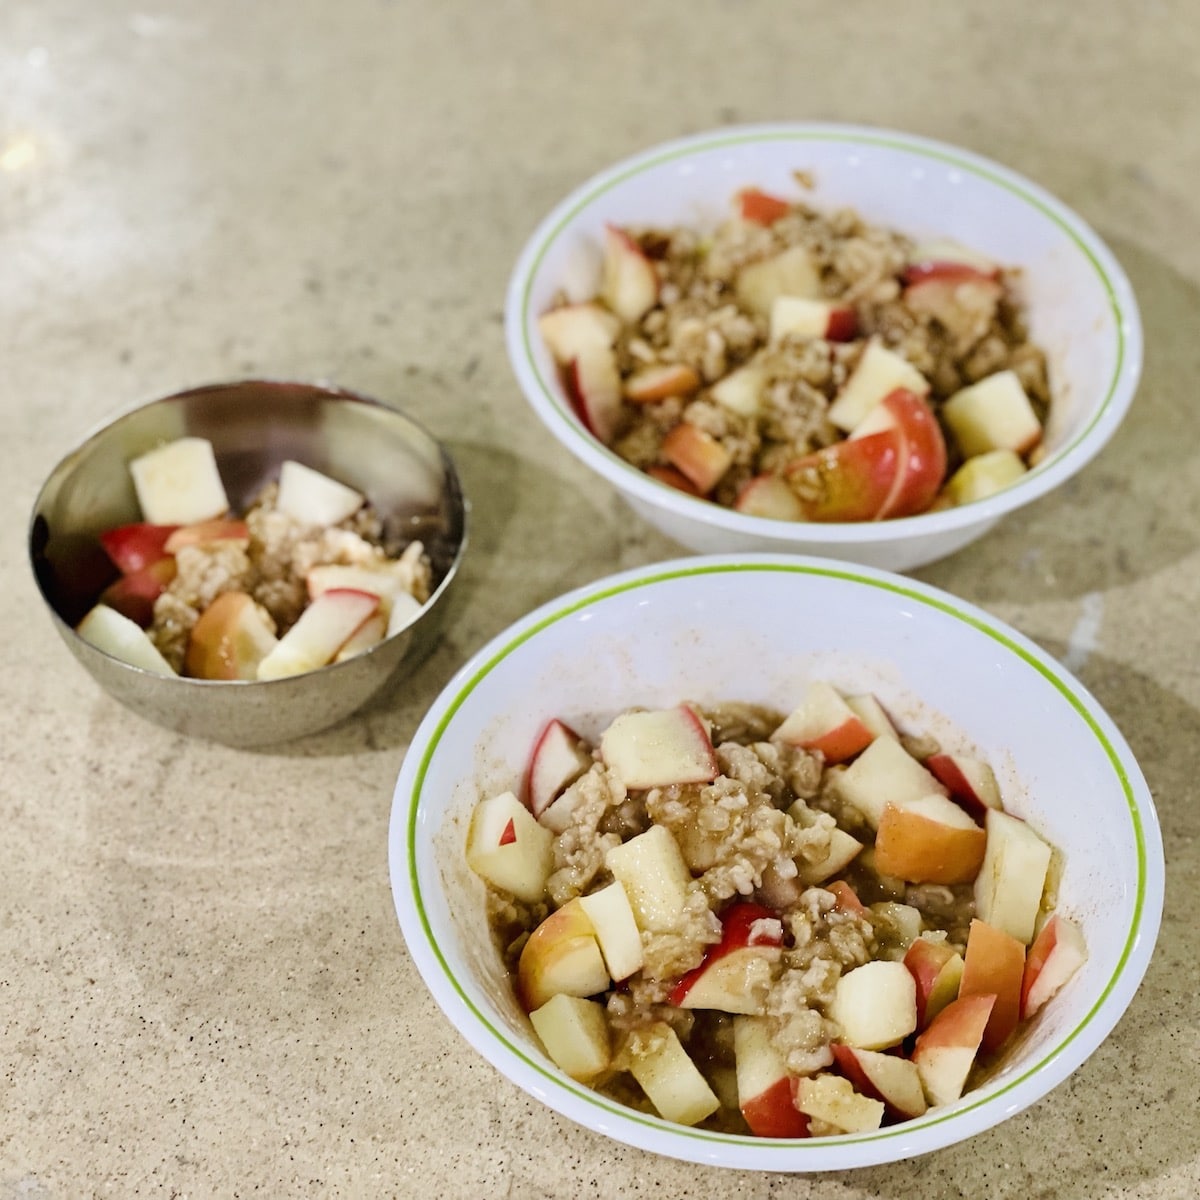 Anti-Inflammatory Oatmeal made with Old-Fashioned Oats, Diced Gala Apples, Cinnamon, and 1 tsp Honey. Packed with soluble fiber and anti-inflammatory foods.